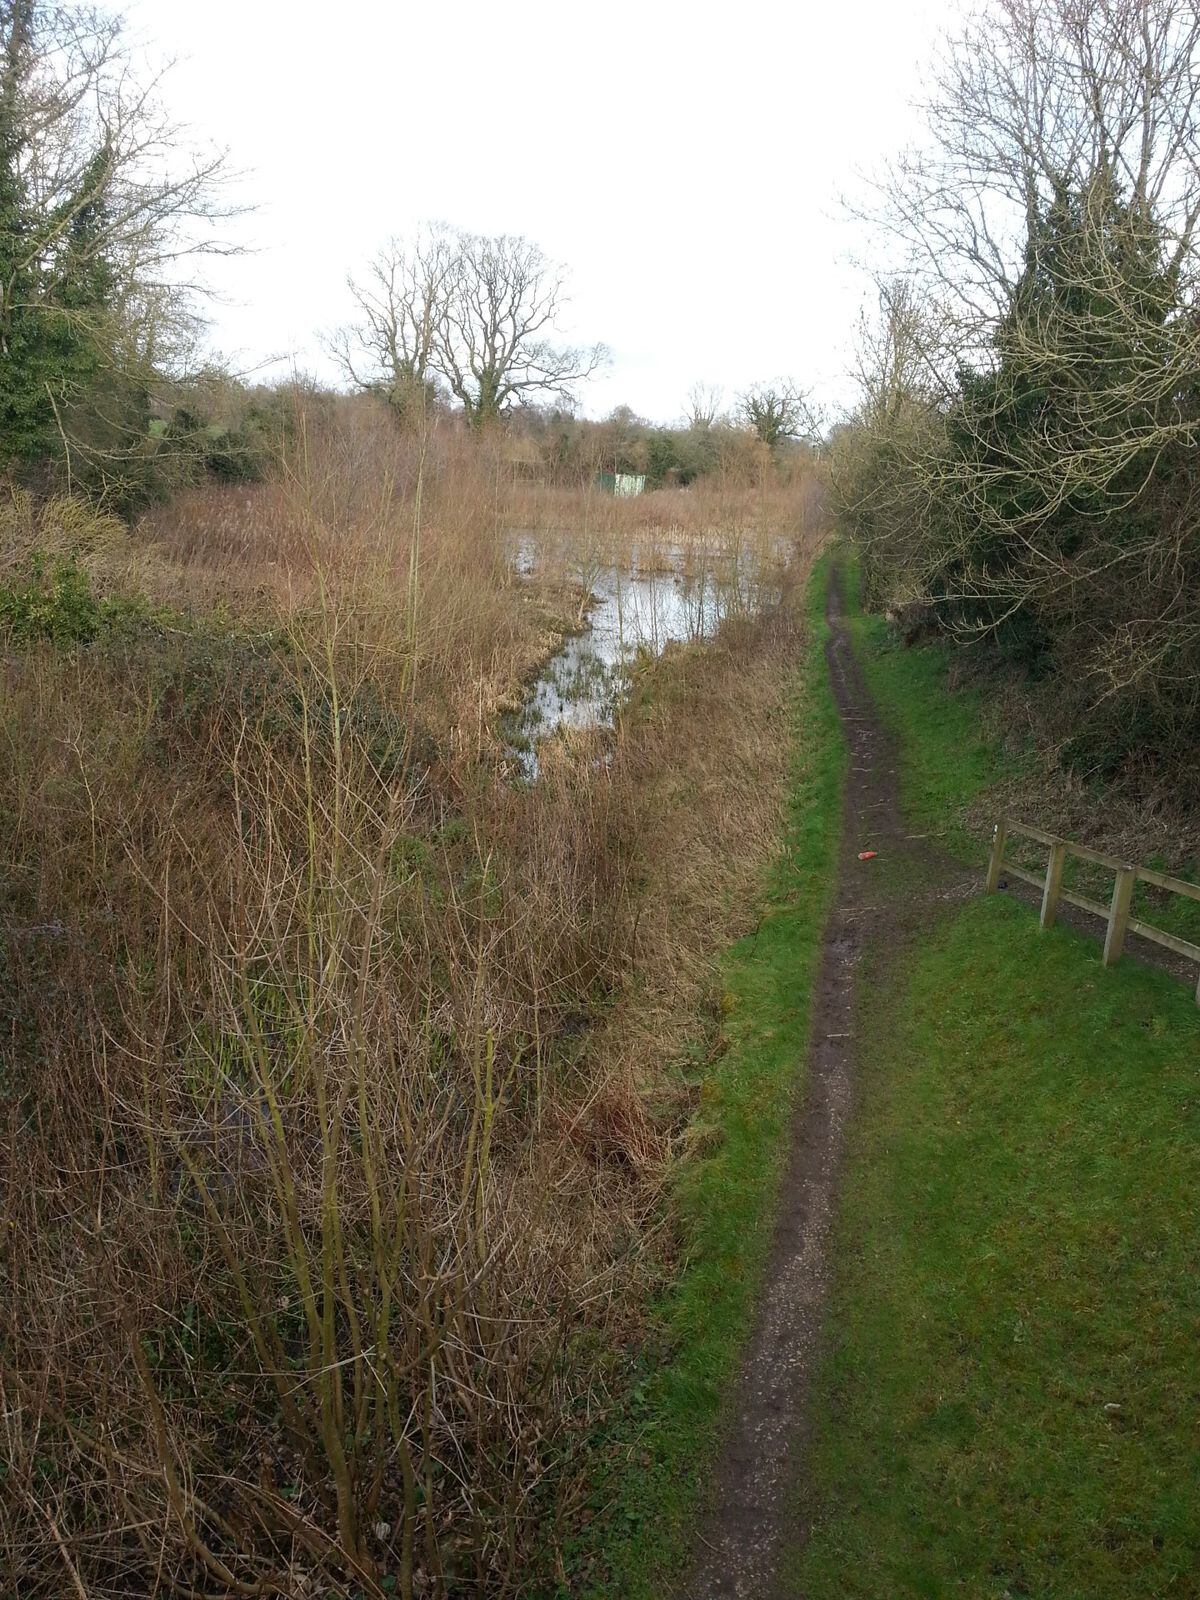 The canal before work began